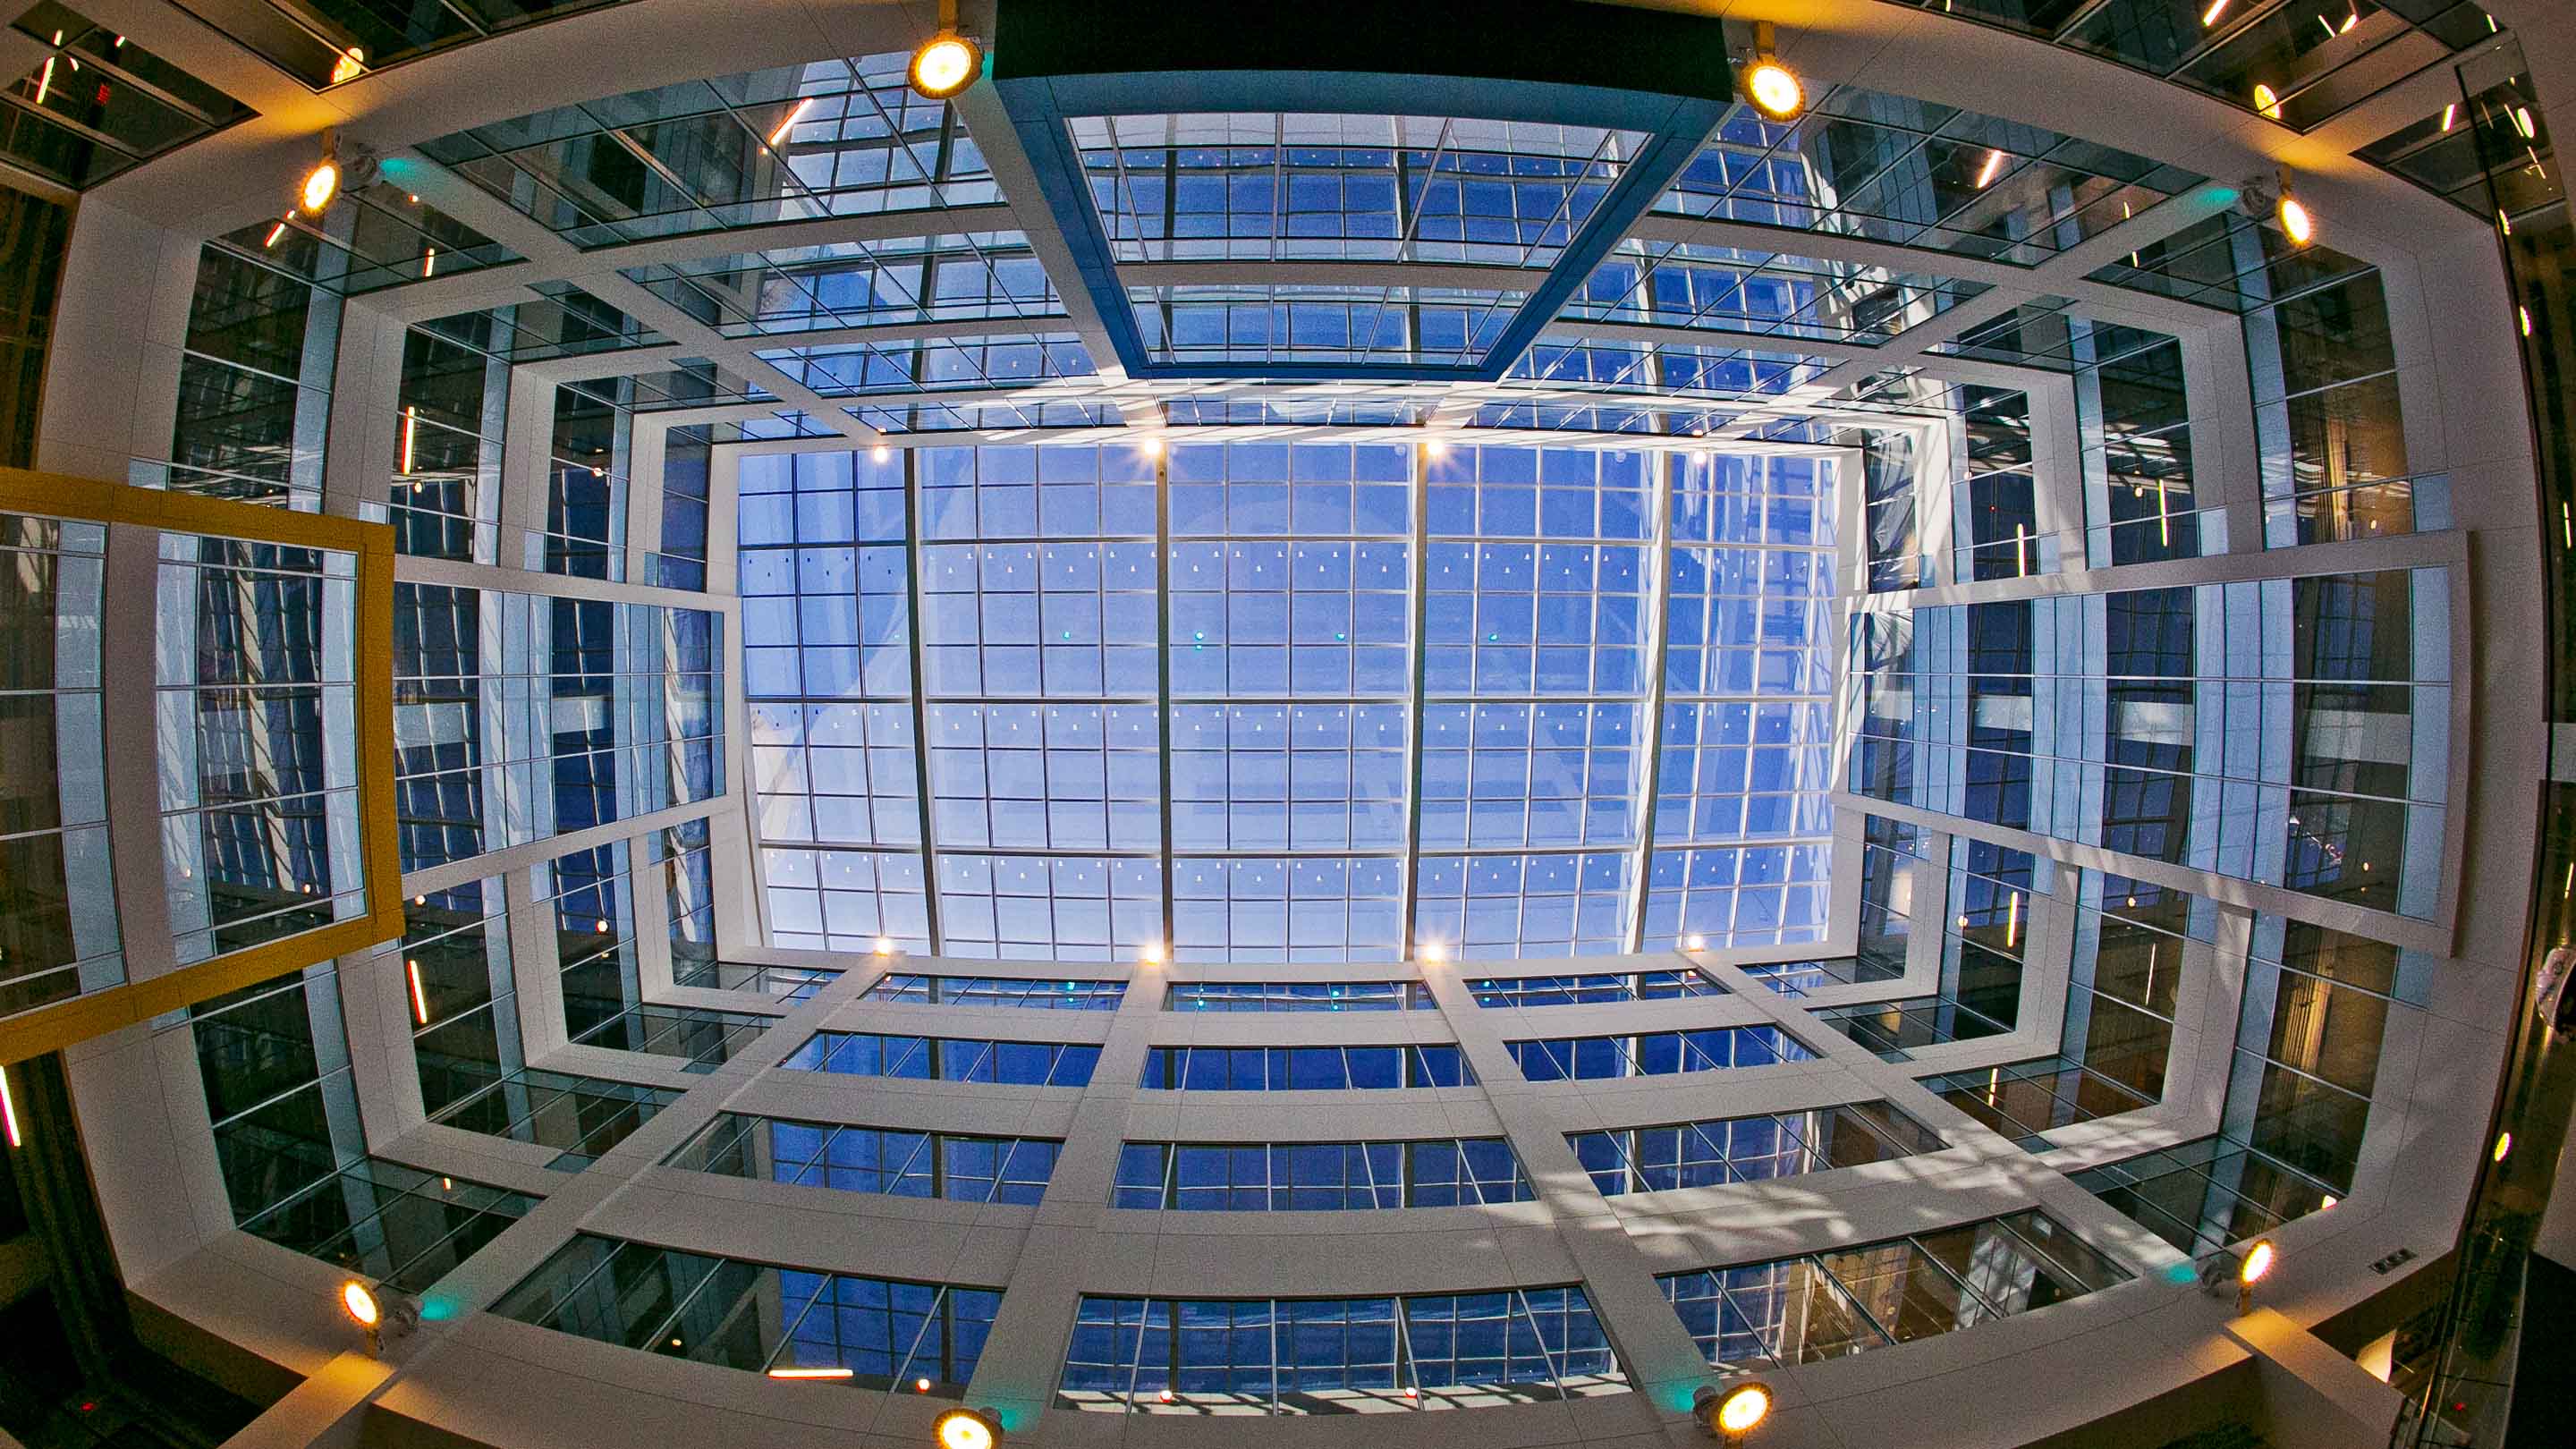 Looking up towards a glass ceiling of a multi-floor building atrium. 